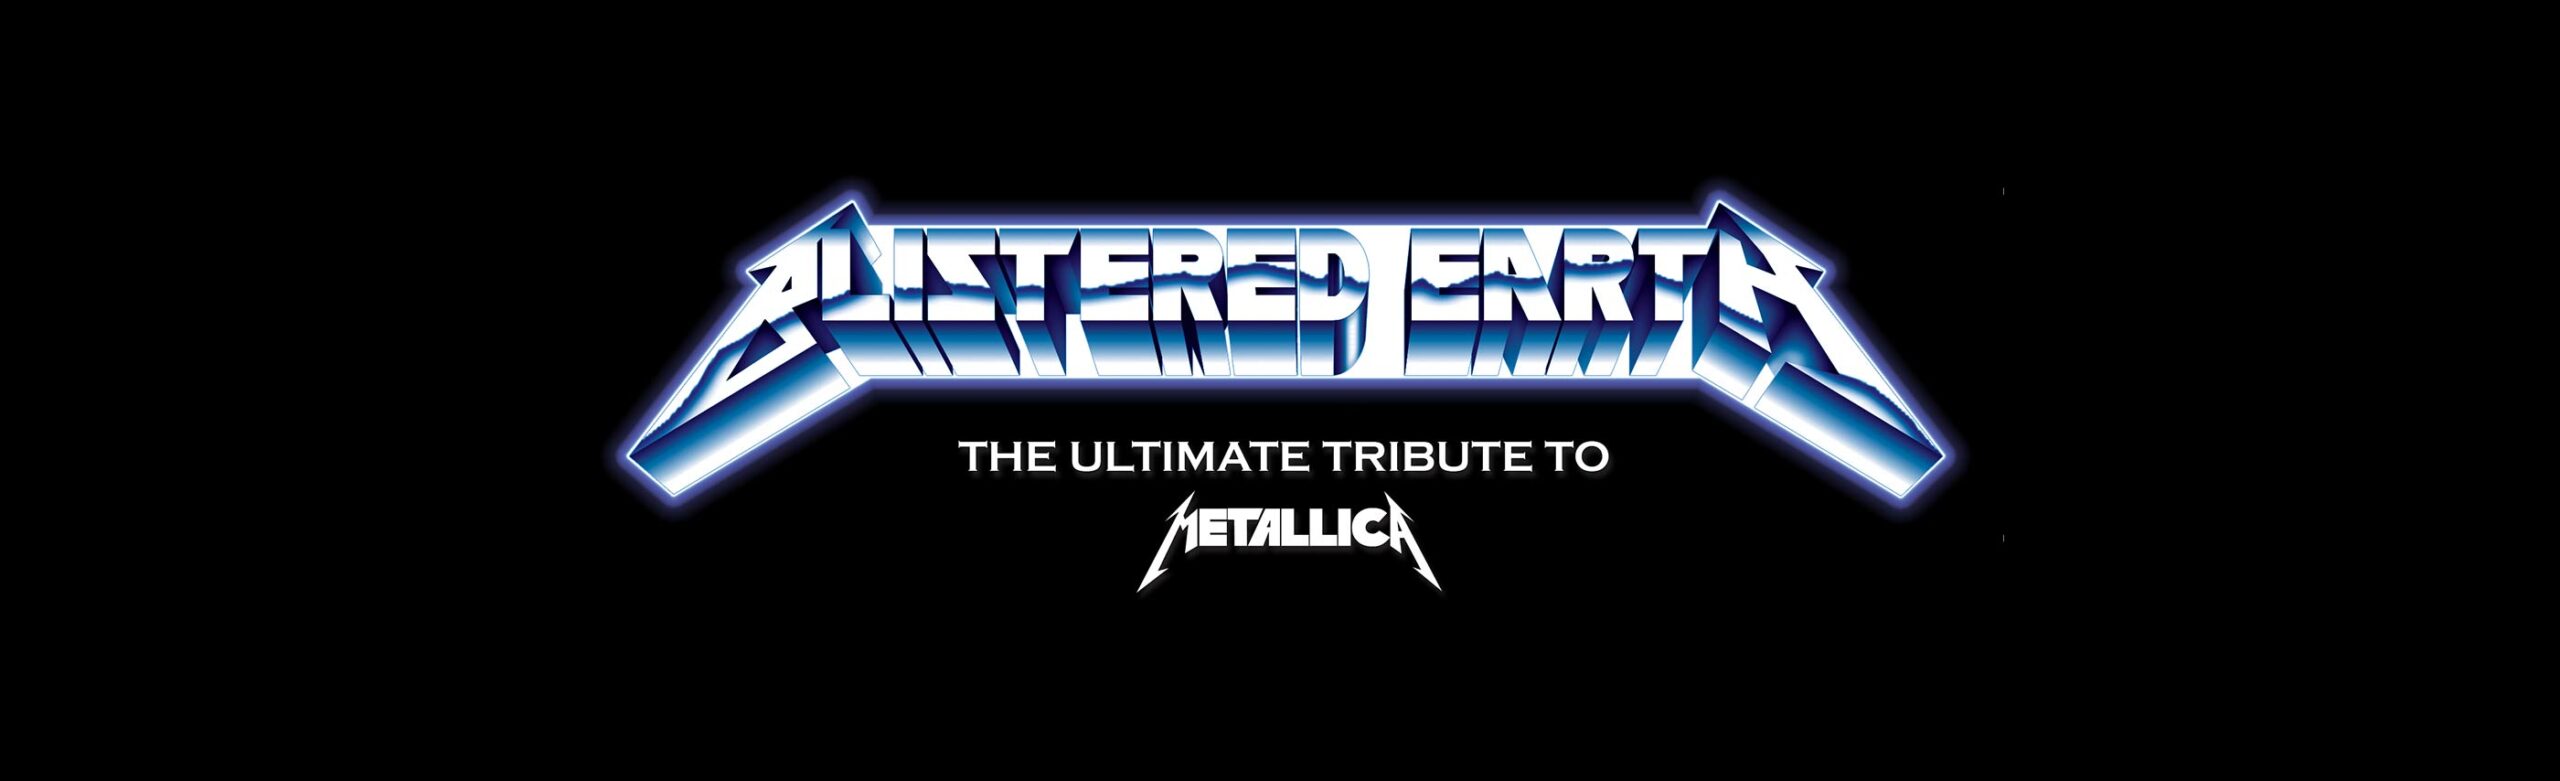 Metallica Tribute Band Blistered Earth Announces Show at the Rialto Image